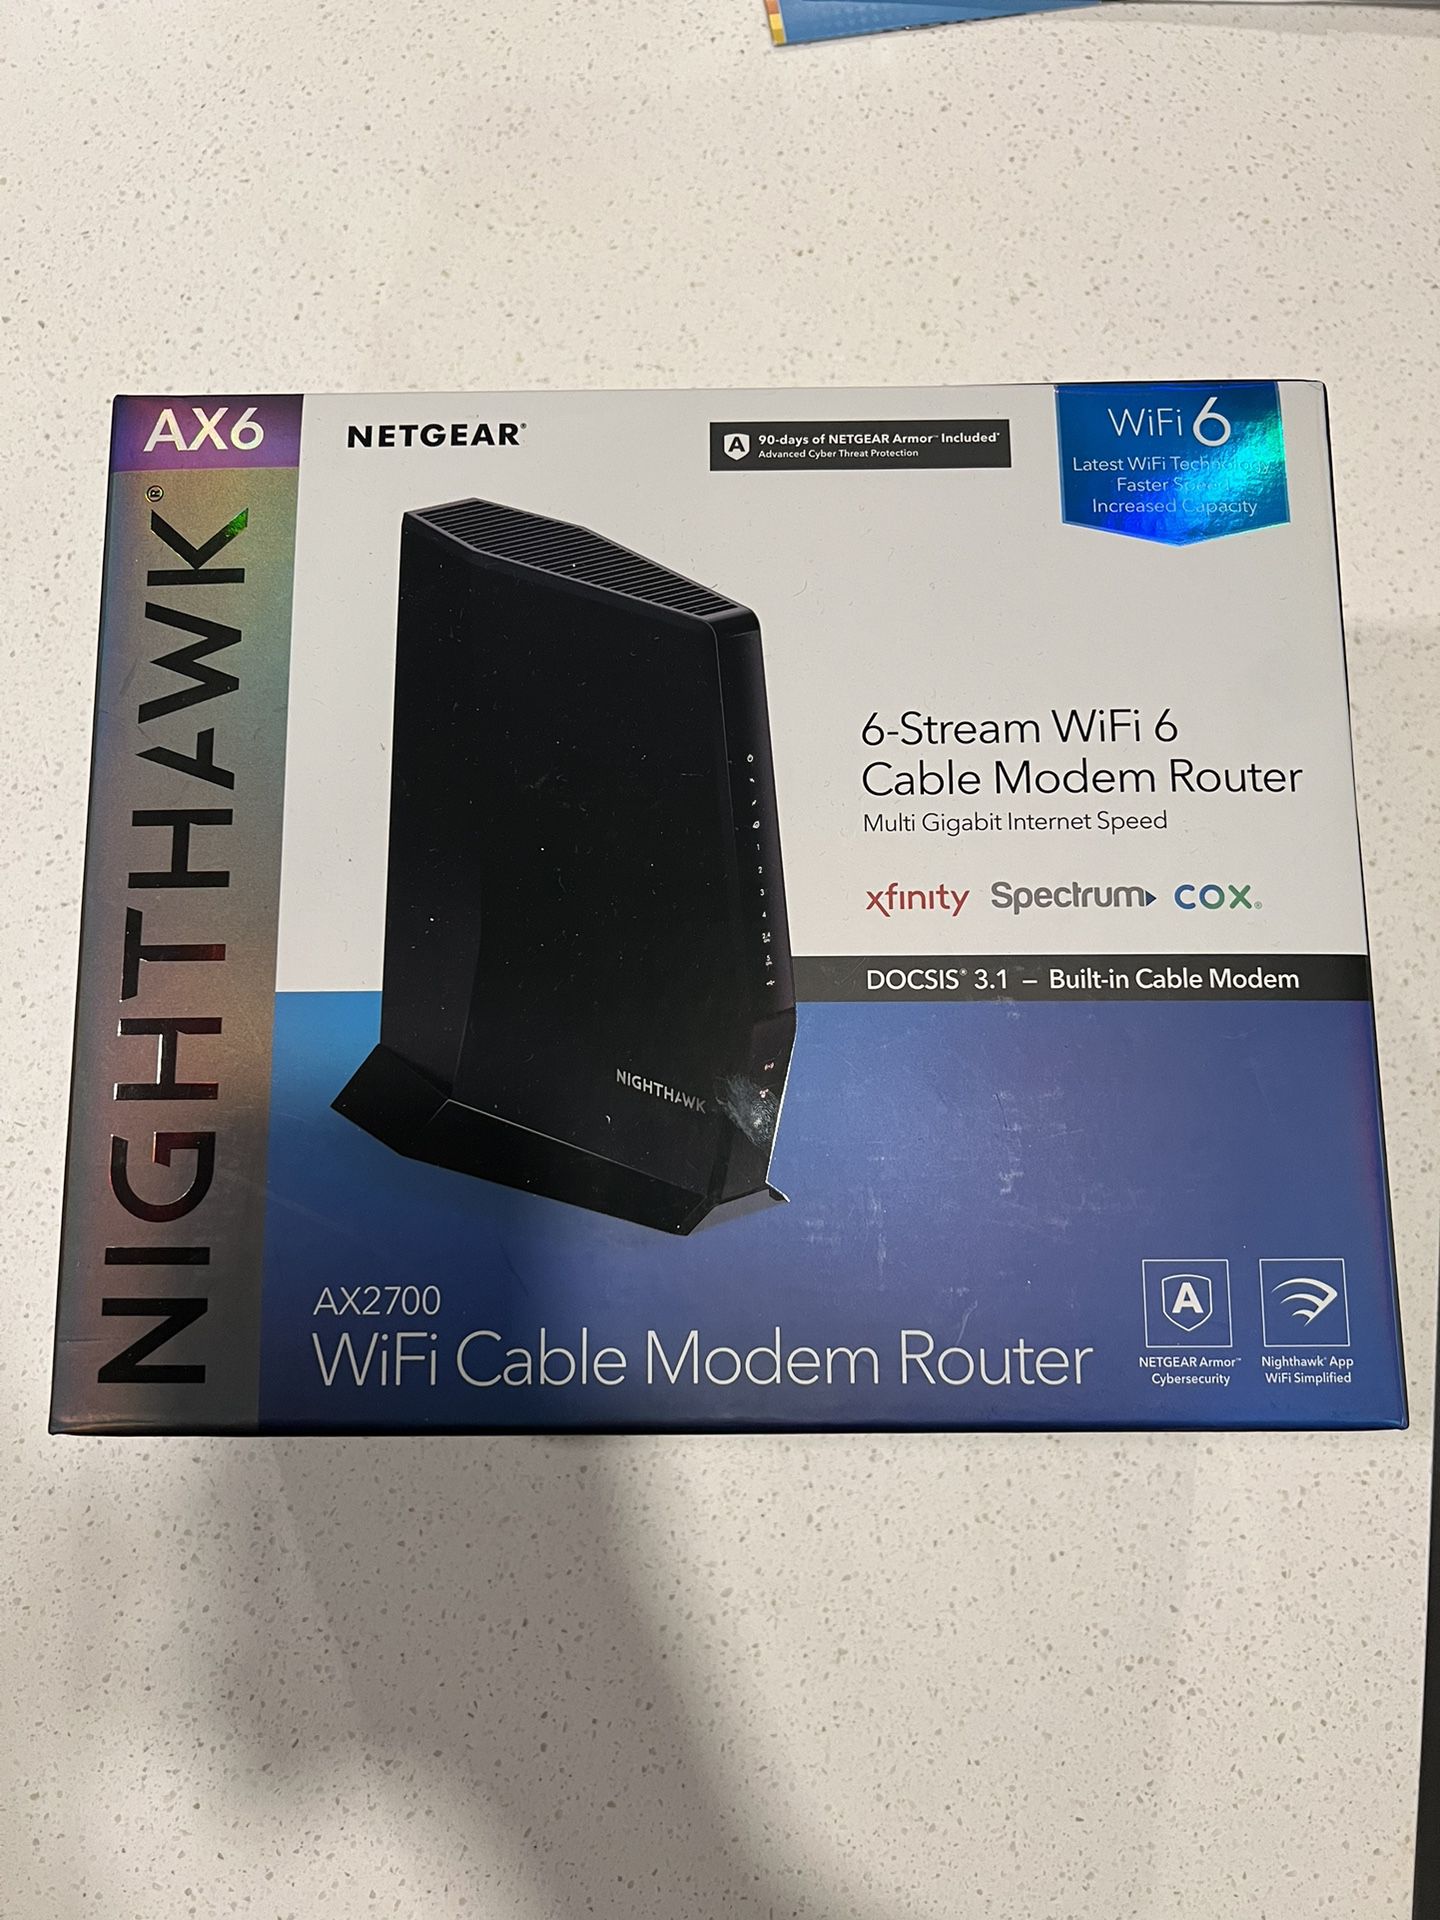 NETGEAR - Nighthawk AX2700 Router with 32 x 8 DOCSIS 3.1 Cable Modem WI-FI 6